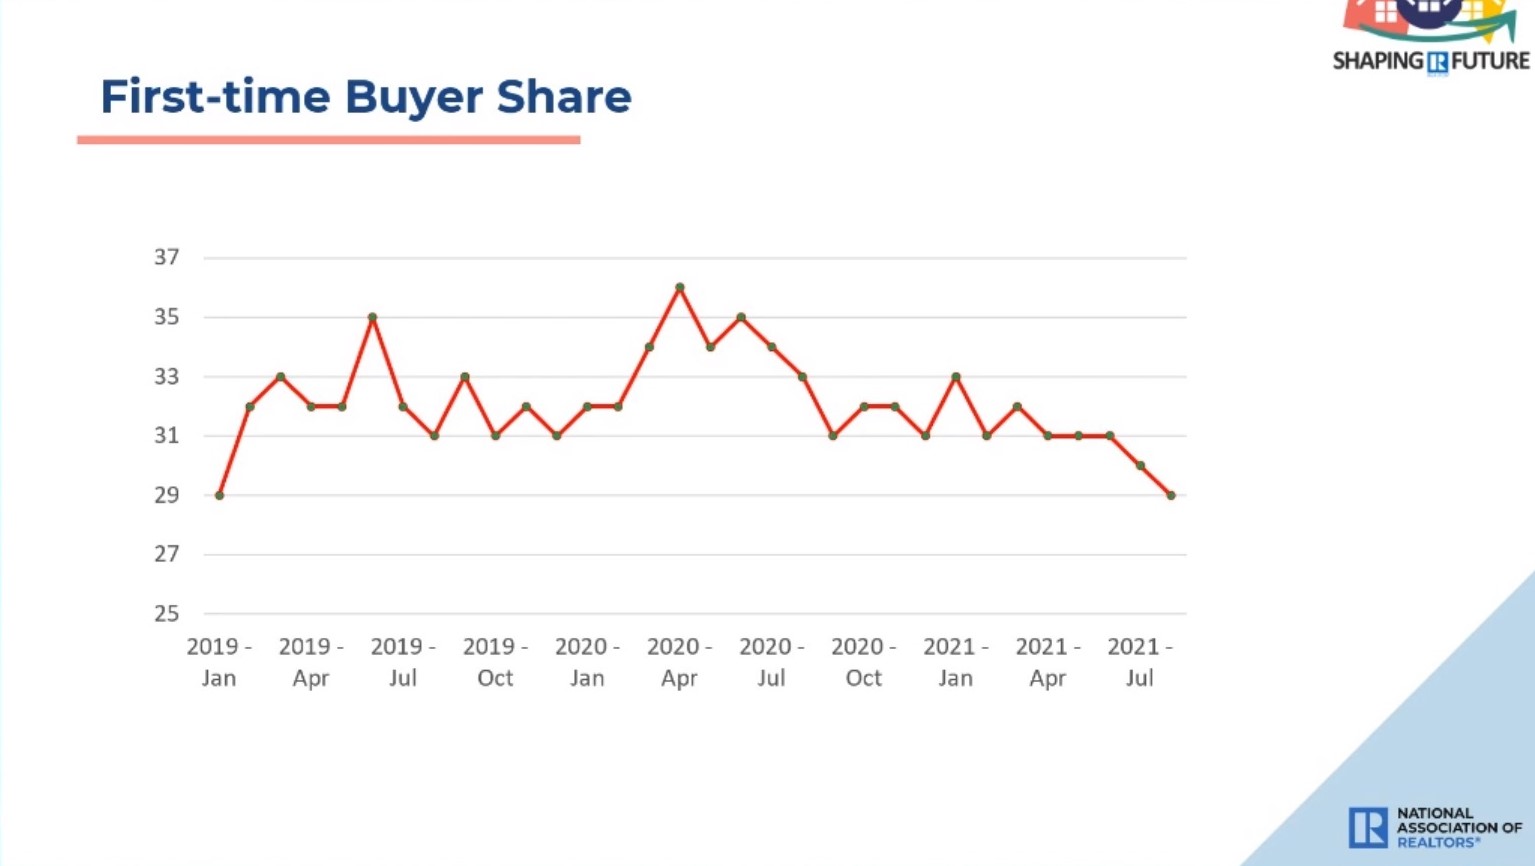 First-time Buyer Share